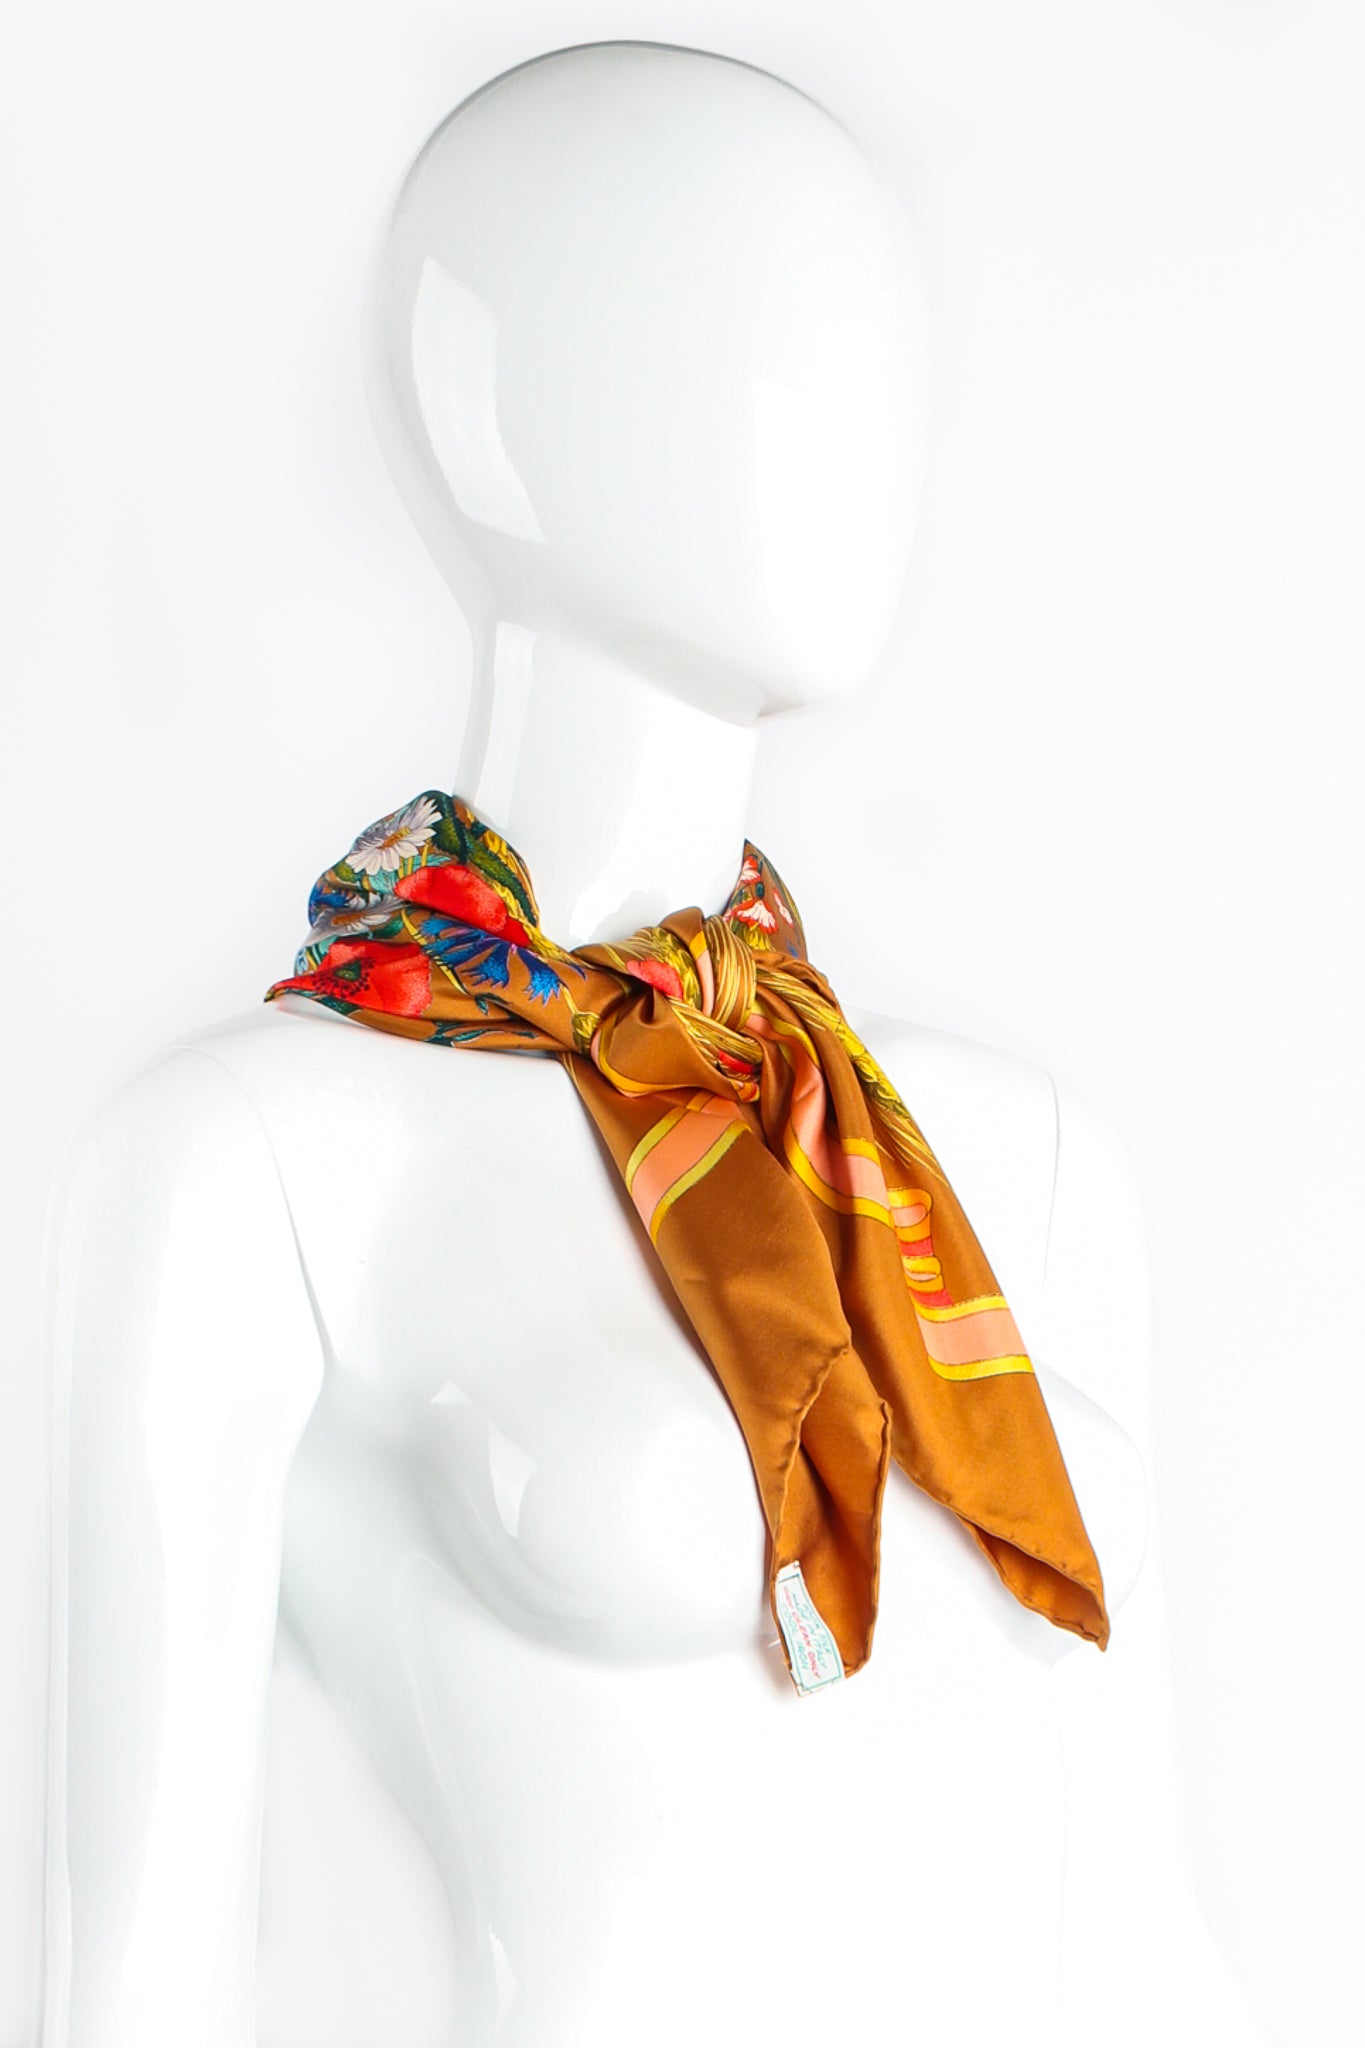 Vintage Gucci V. Accornero Wildflower Wheat Floral Bouquet Scarf on Mannequin Tied at Recess Los Angeles